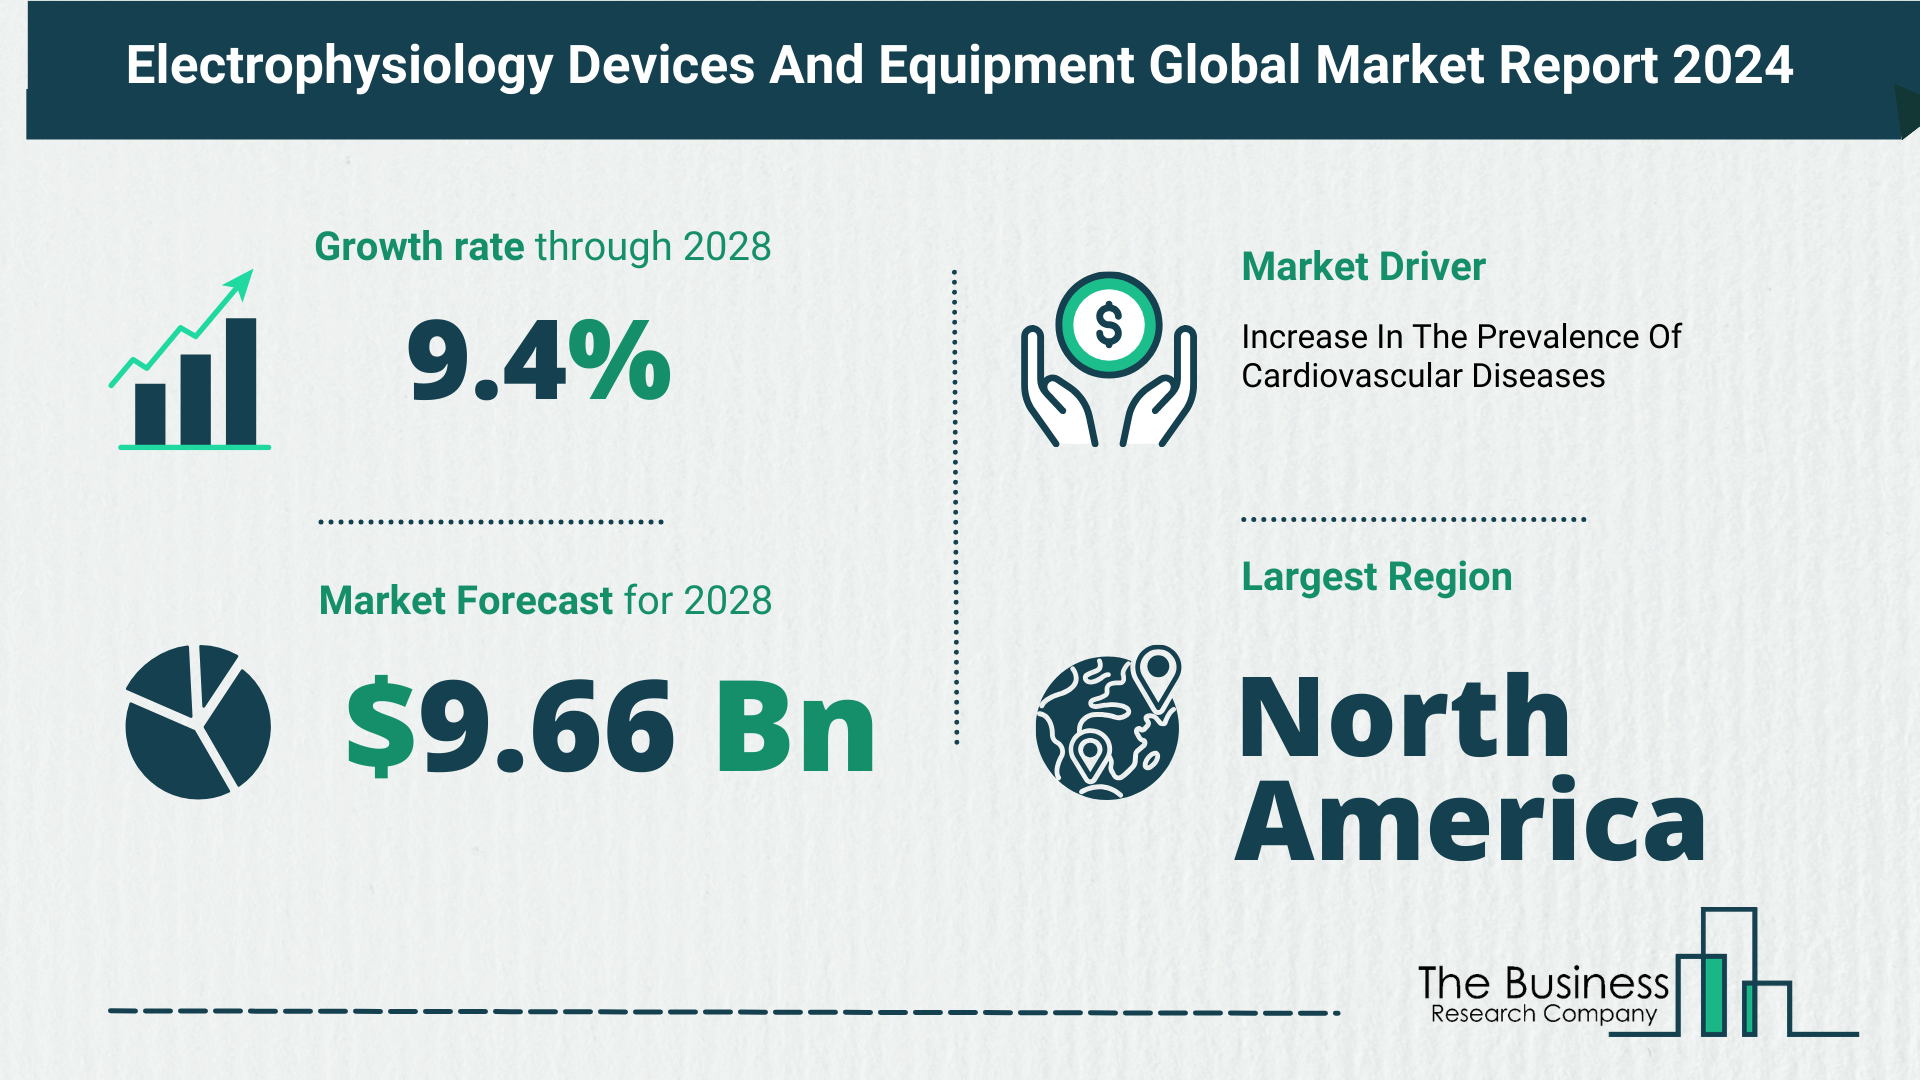 Key Trends And Drivers In The Electrophysiology Devices And Equipment Market 2024 | Boston Scientific Corporation, Abbott Laboratories, GE Healthcare, Philips Healthcare